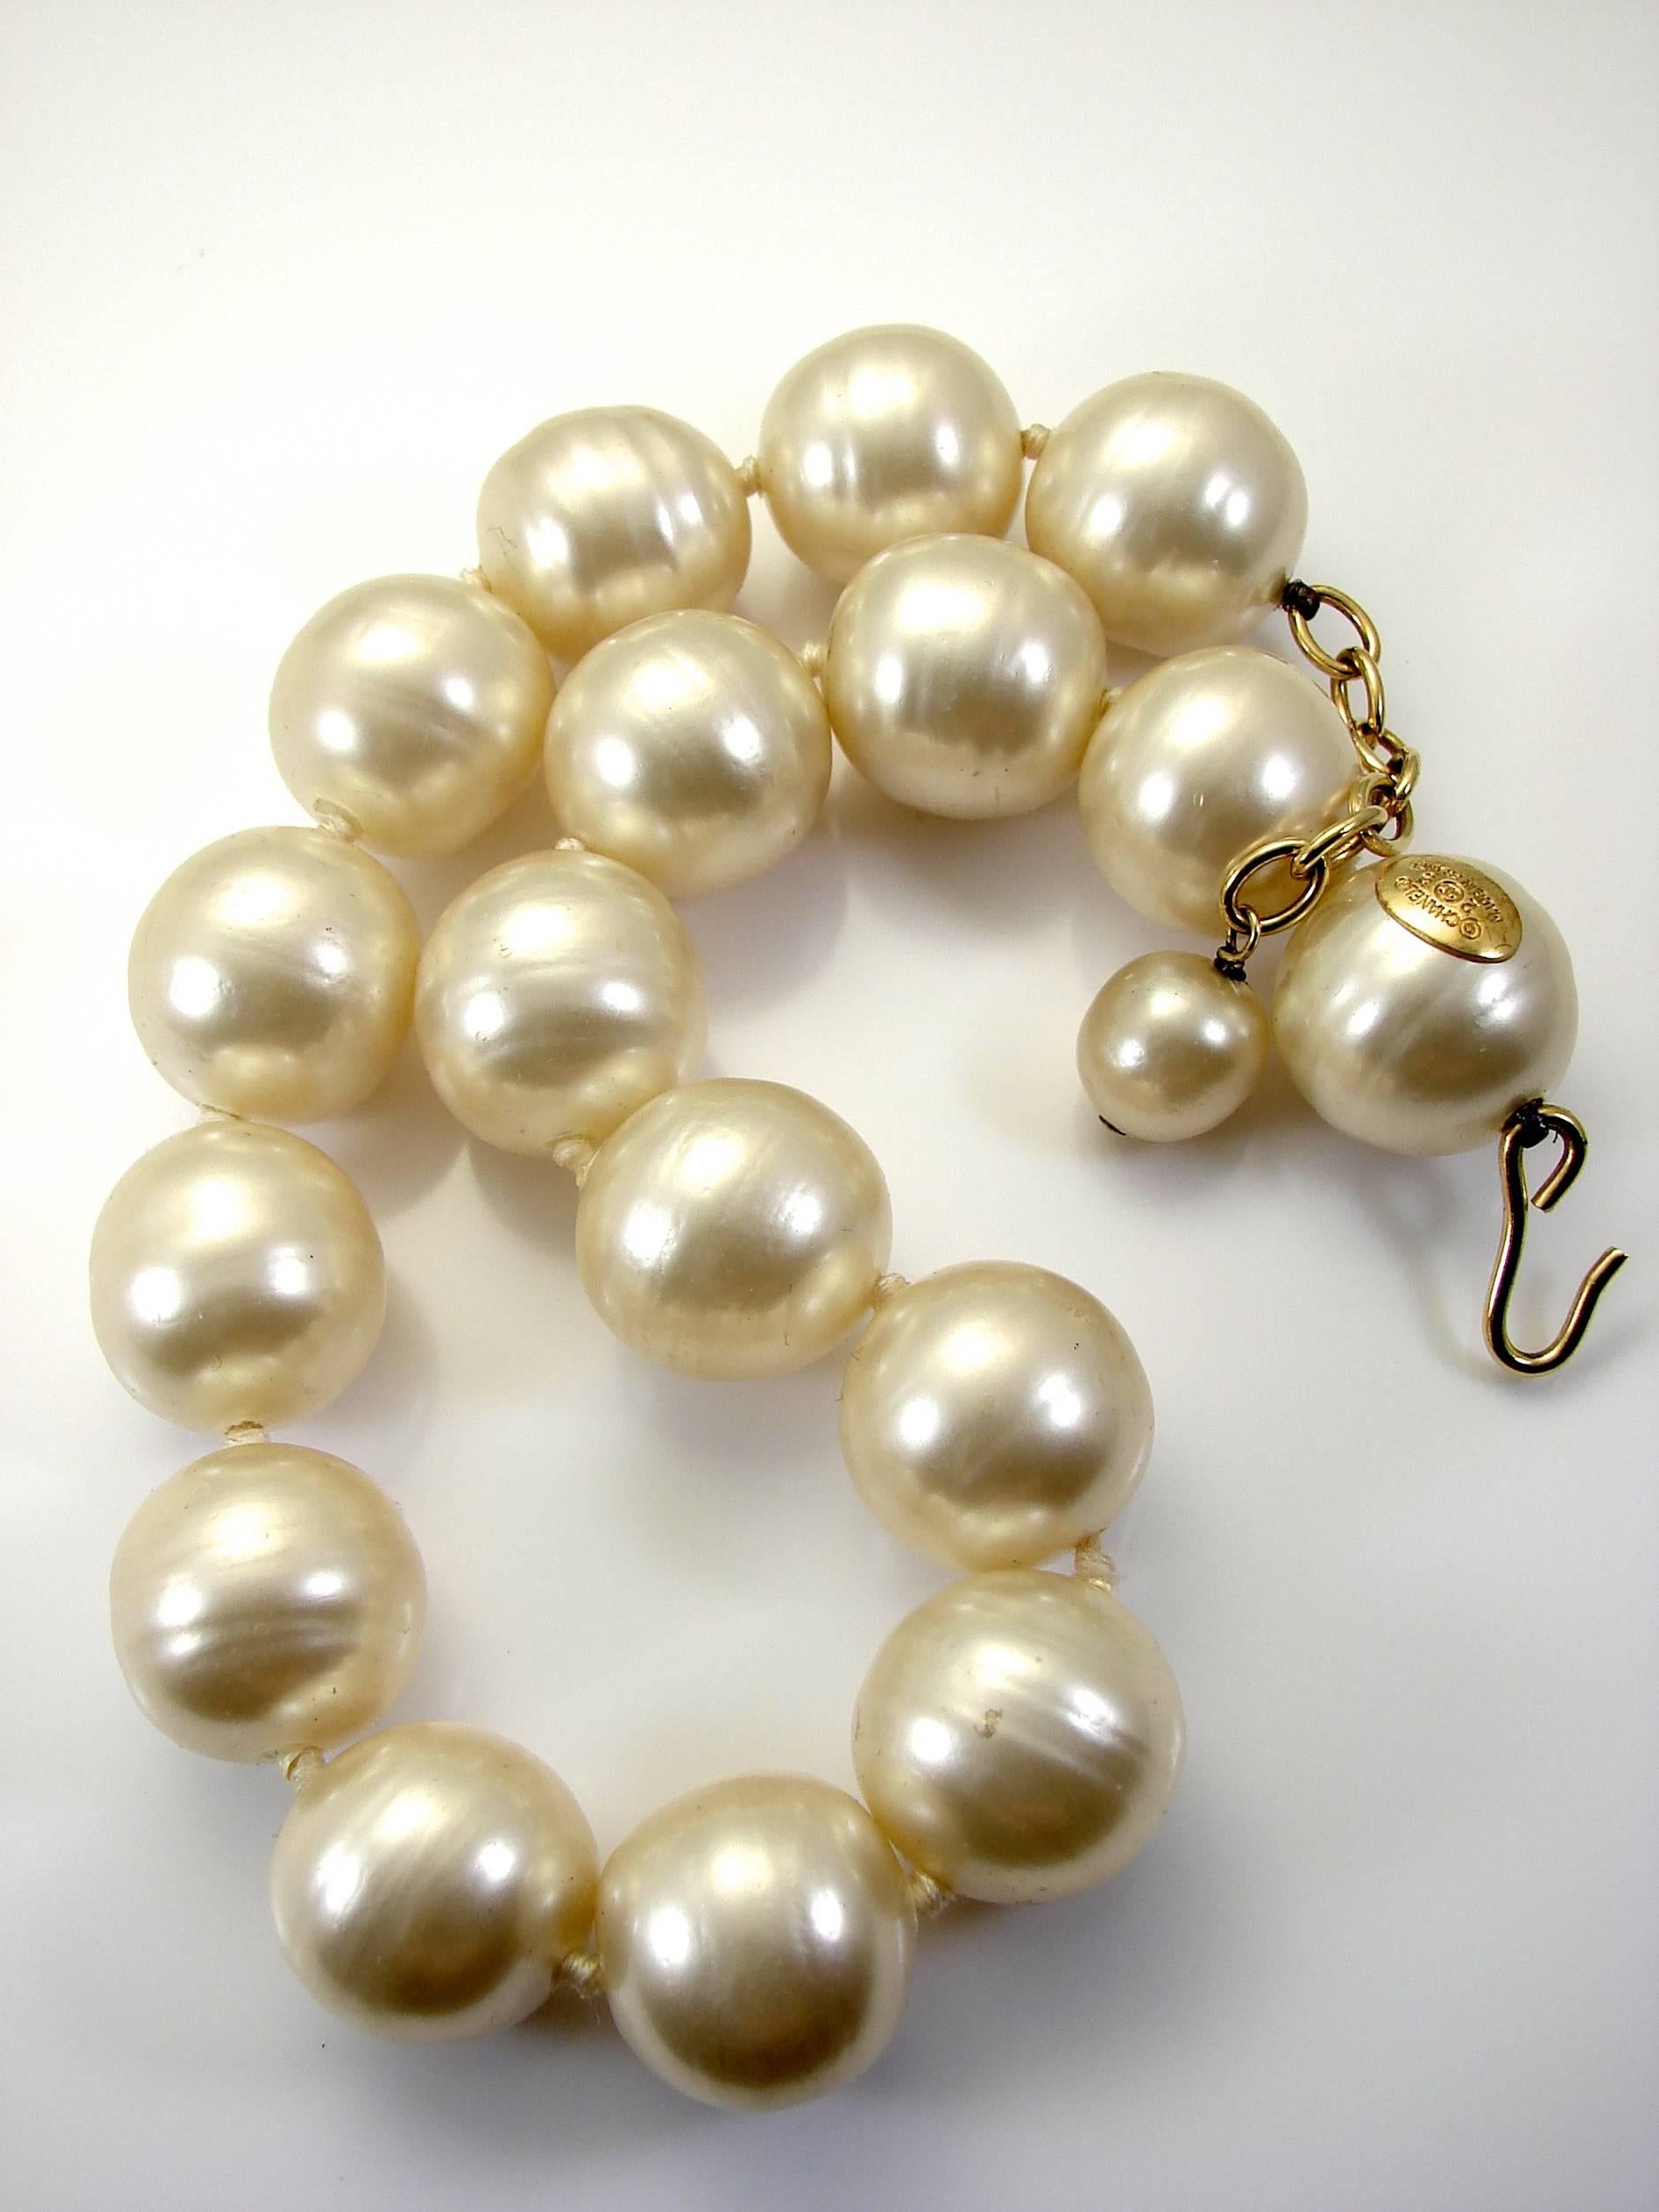 Women's Chanel Choker Necklace Baroque Pearls Poured Glass 90s Season 2 9 